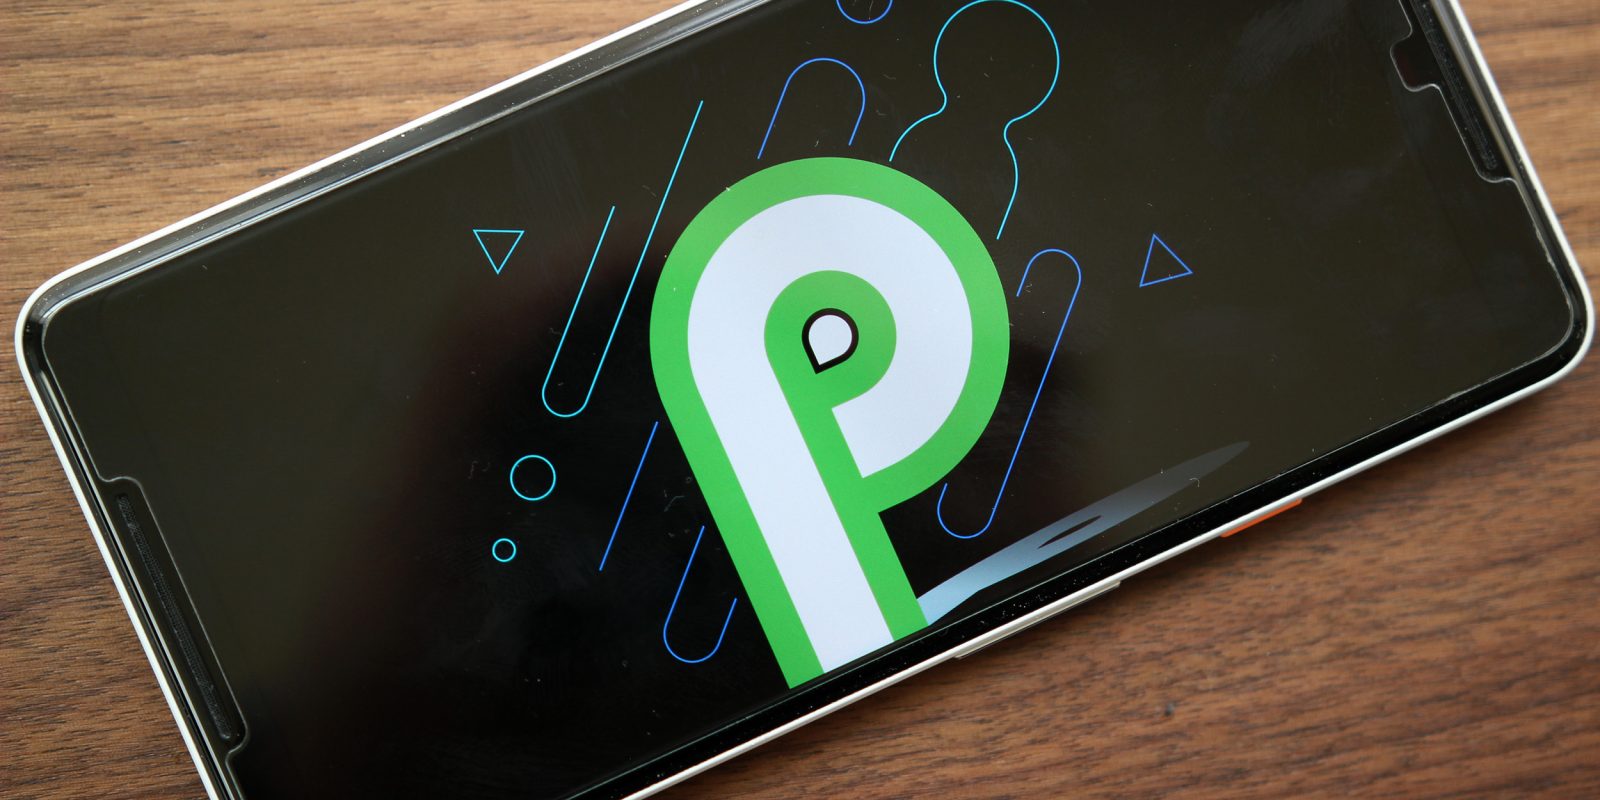 Android P may be released soon